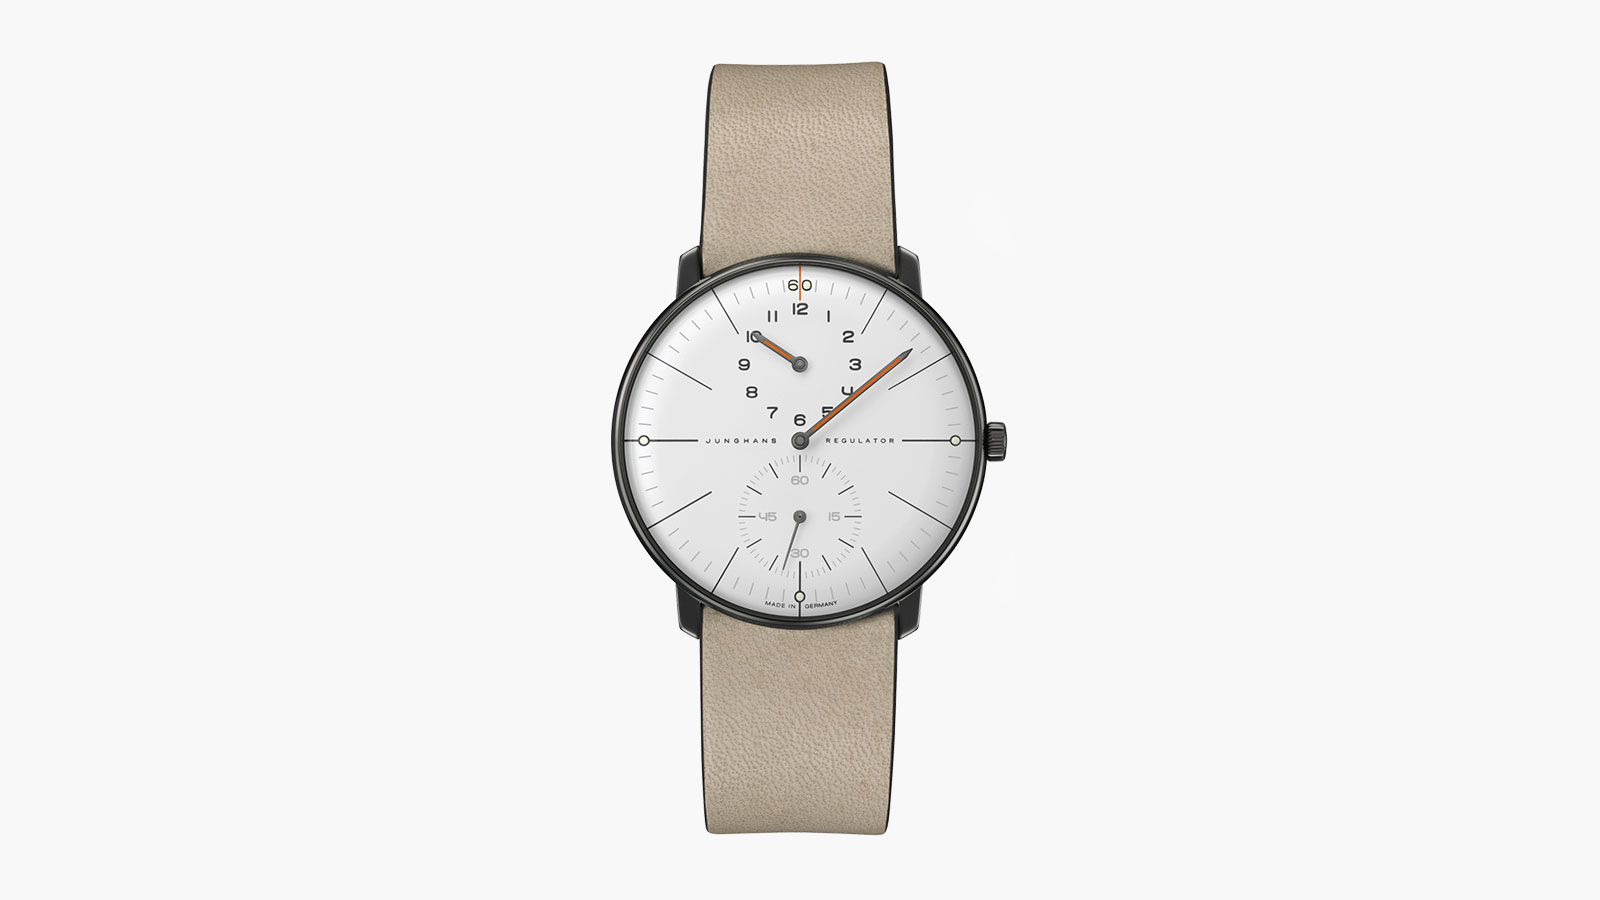 A men's watch with a neutral band and a white face